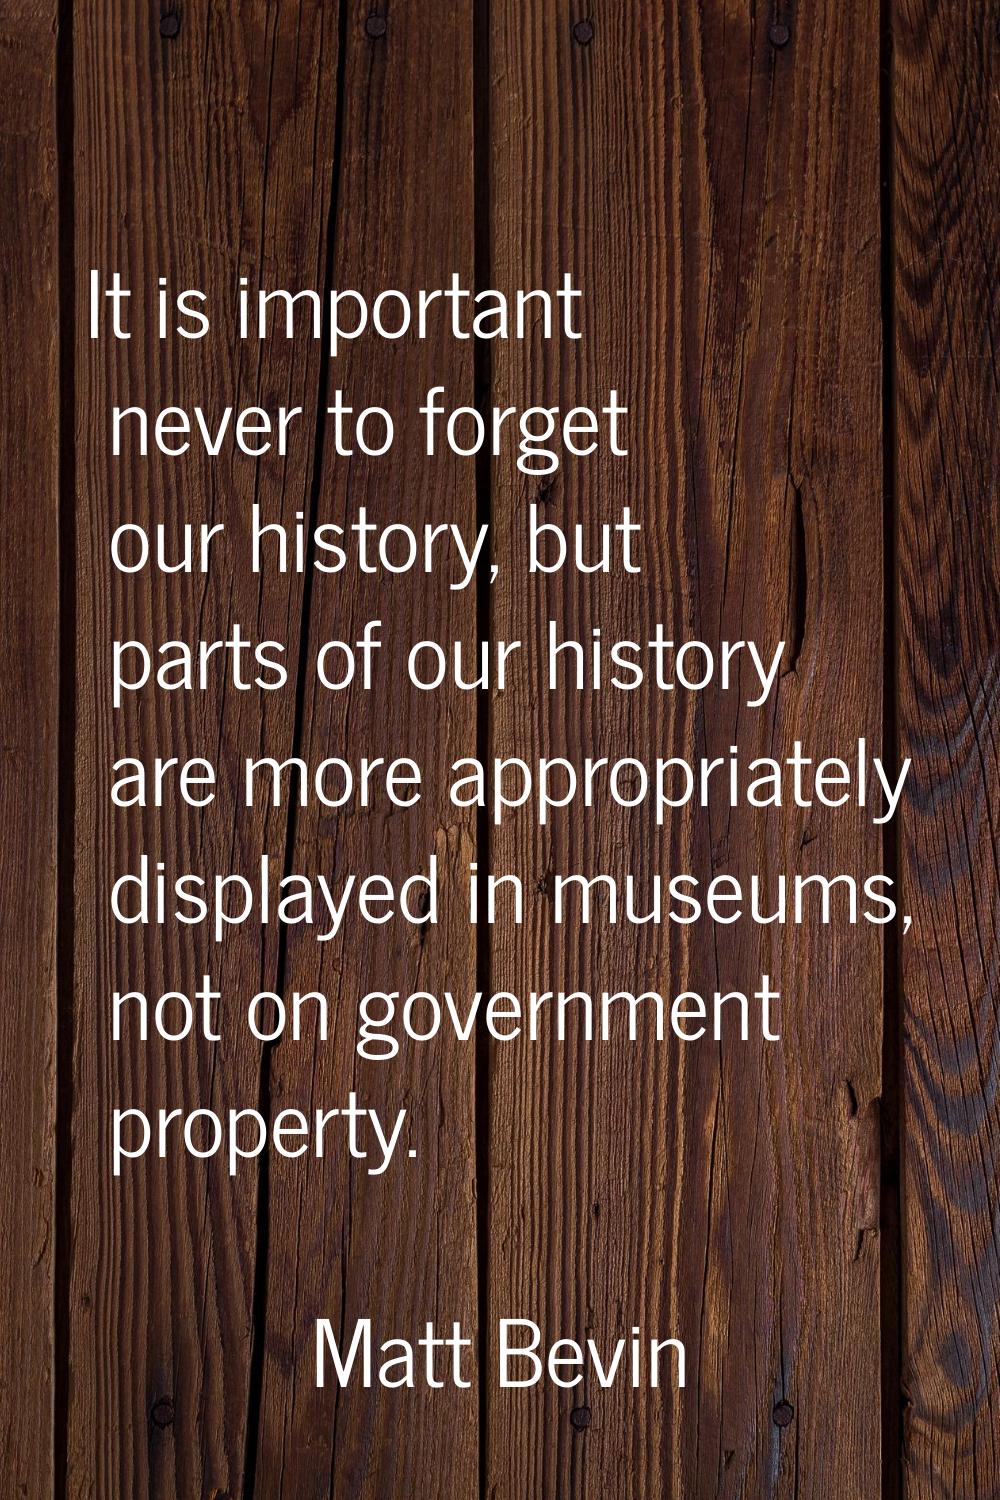 It is important never to forget our history, but parts of our history are more appropriately displa